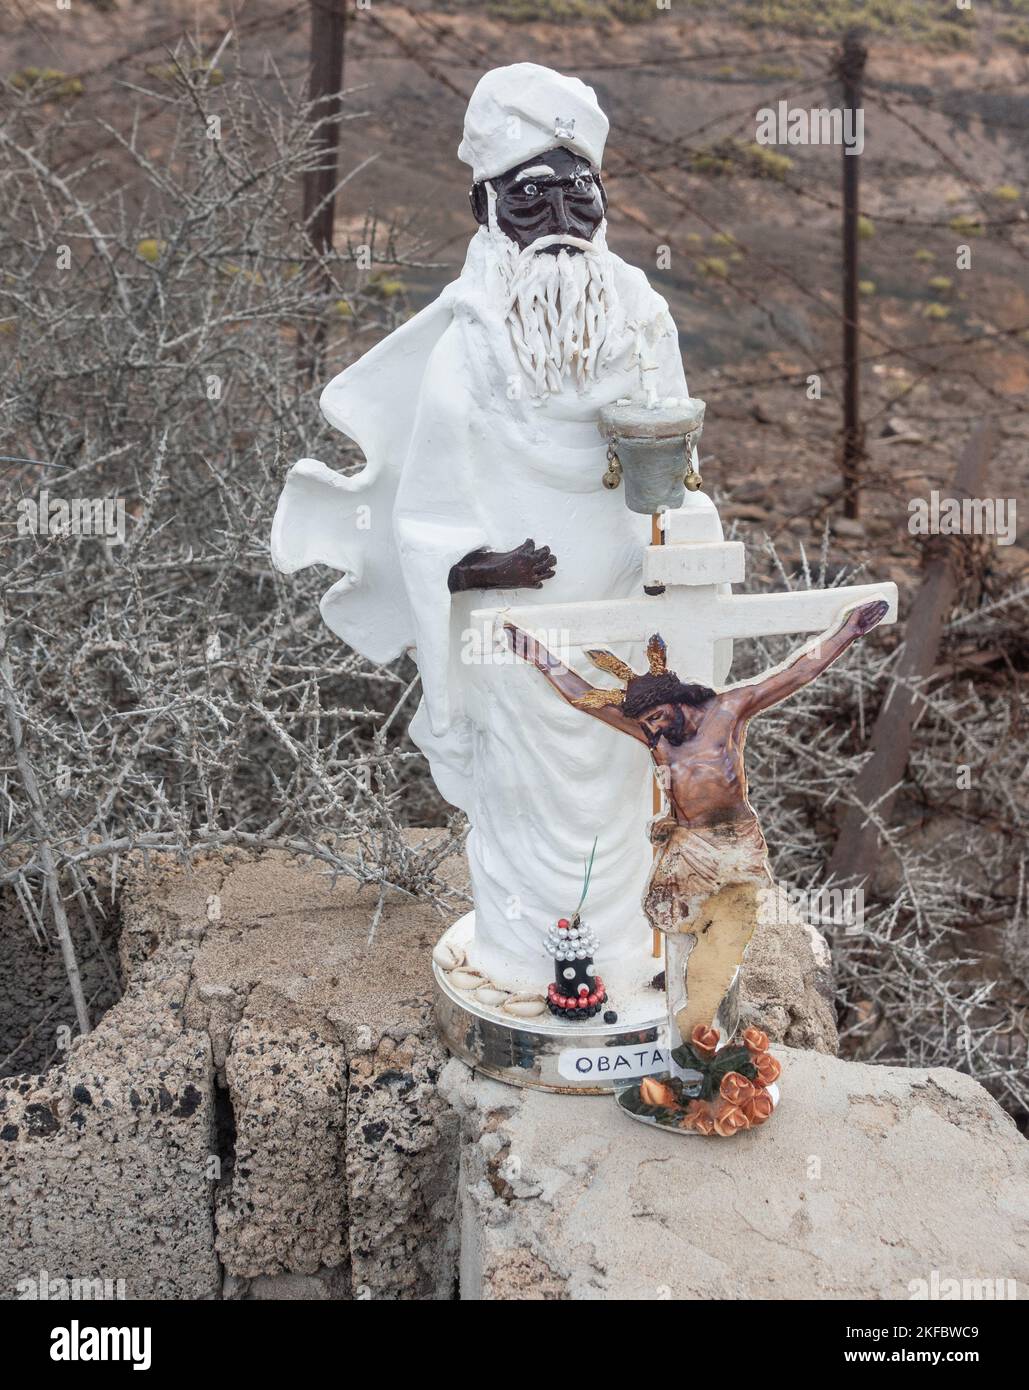 Small statues of Obatala and Jesus Christ on cross by roadside. In the Orisha faiths, Obatalá is the sky father. Stock Photo